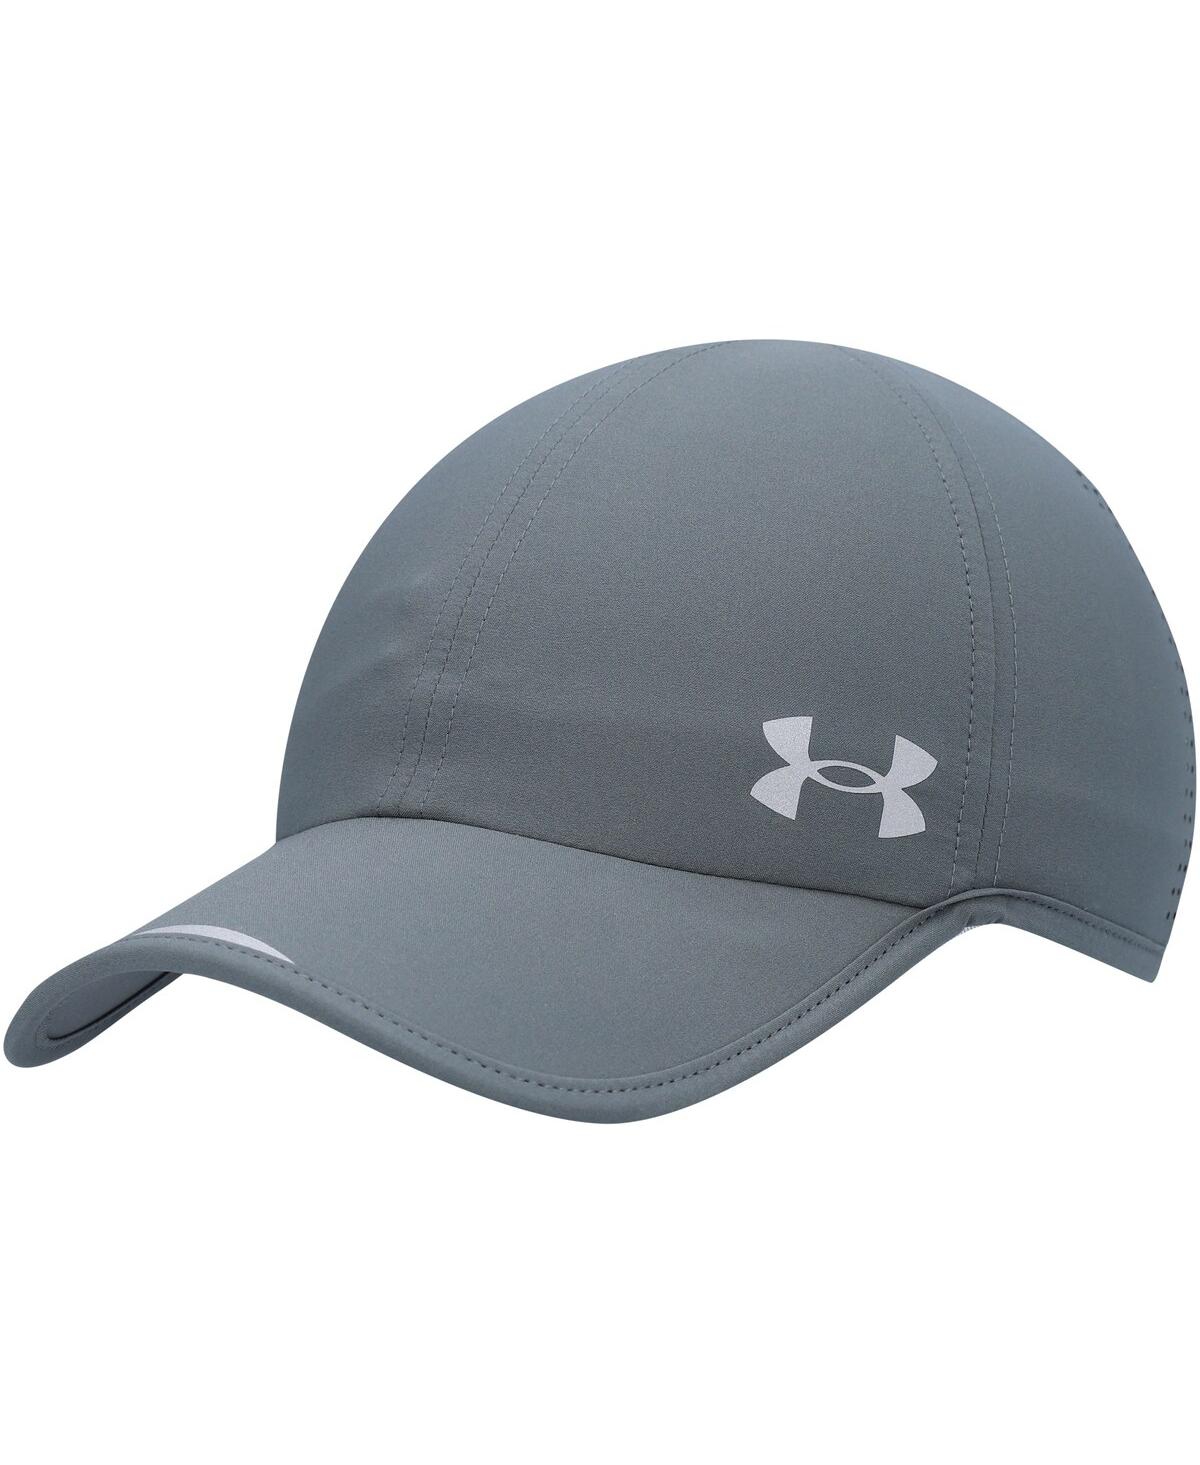 Under Armour Men's  Graphite Iso Chill Launch Run Adjustable Hat